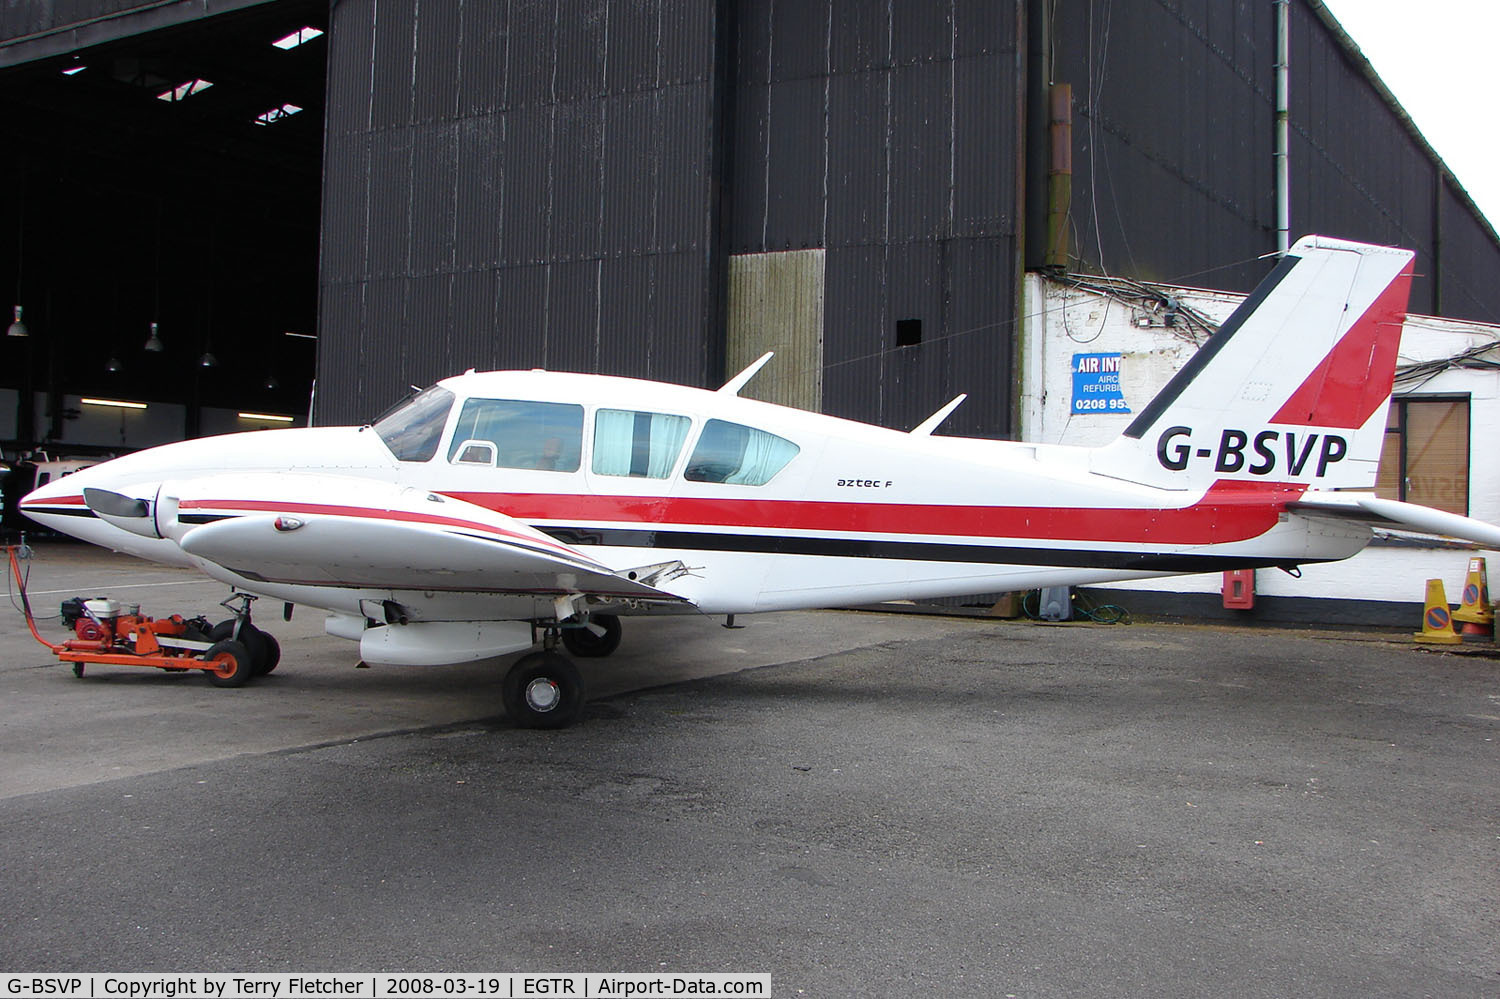 G-BSVP, 1977 Piper PA-23-250 Aztec C/N 27-7754115, Part of the busy GA scene at Elstree Airfield in the northern suburbs of London